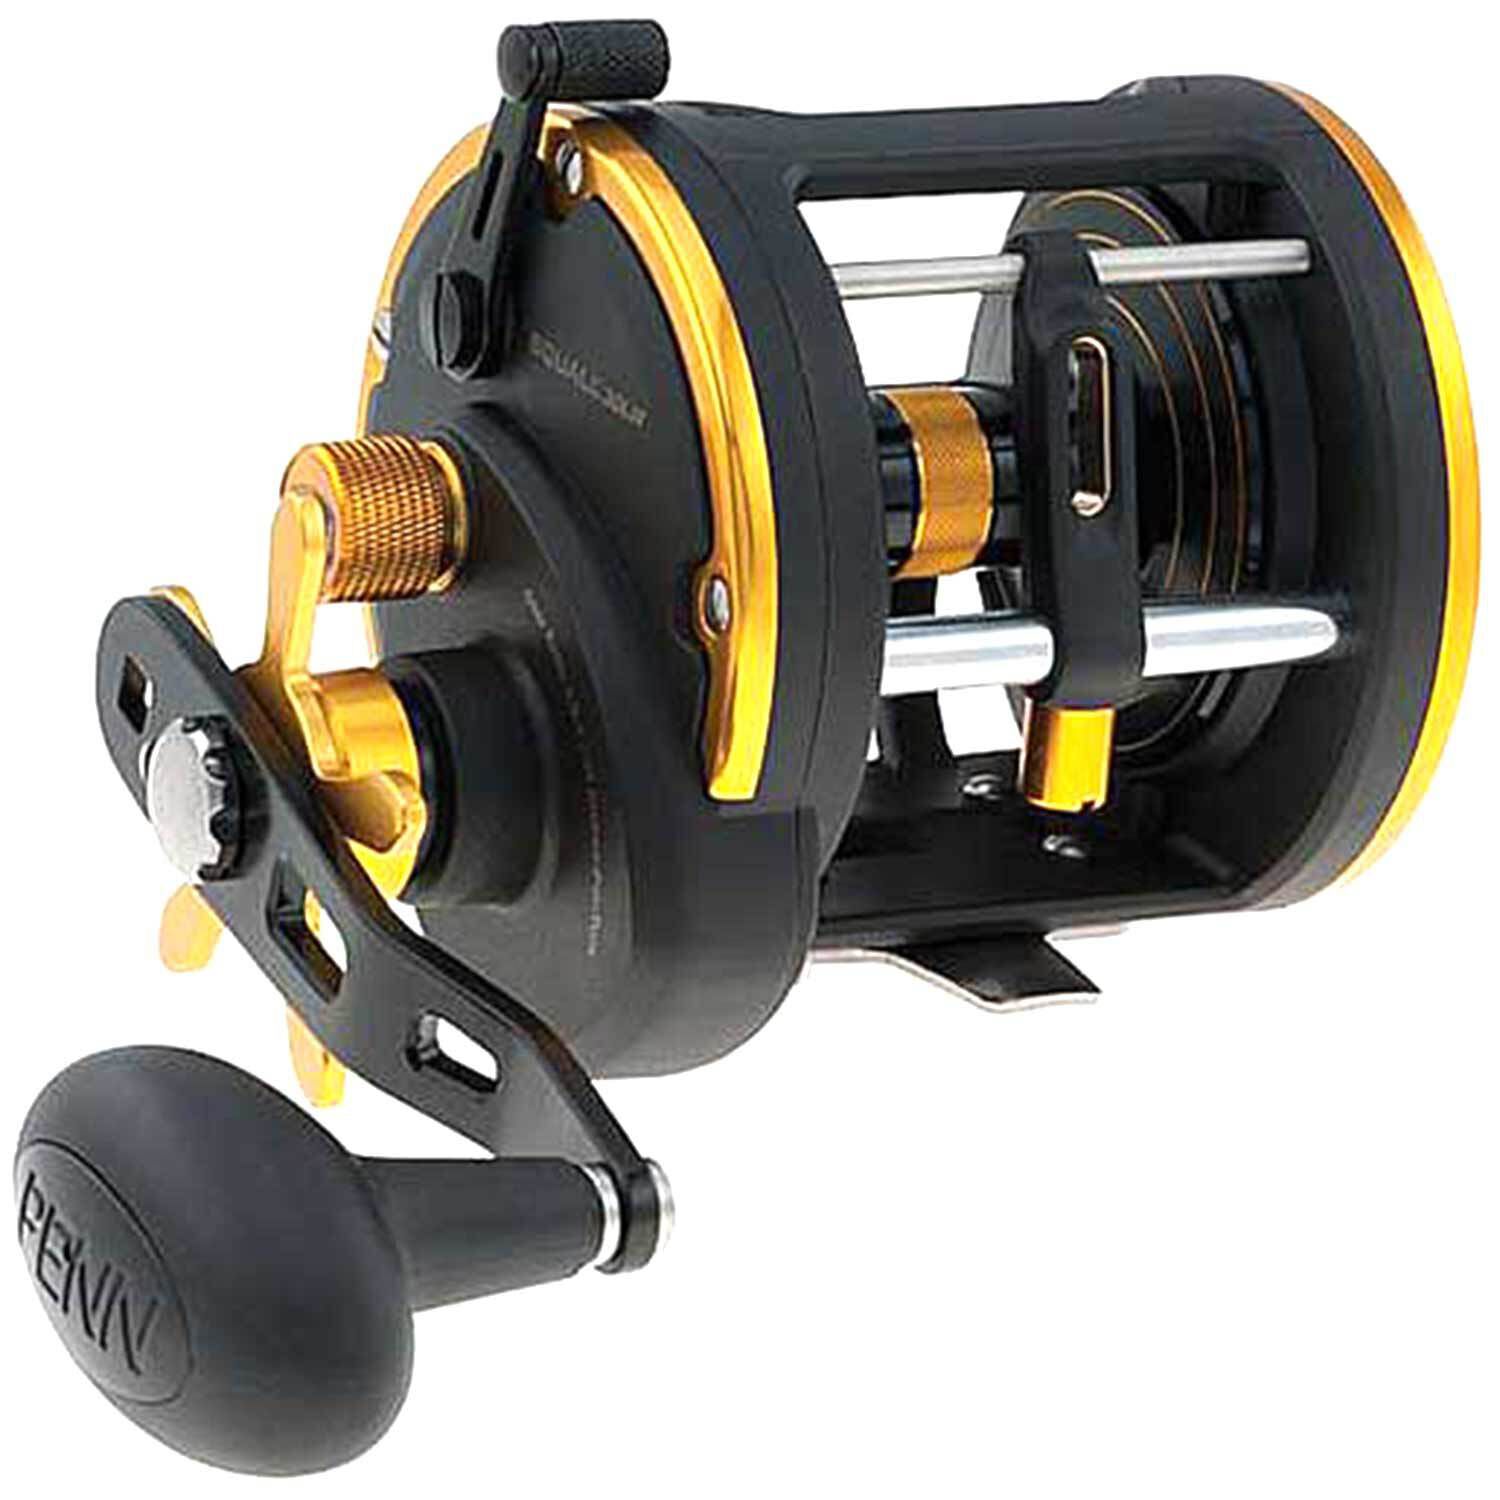 New Penn Squall 30 LD Prelined Rod and Reel Combo 